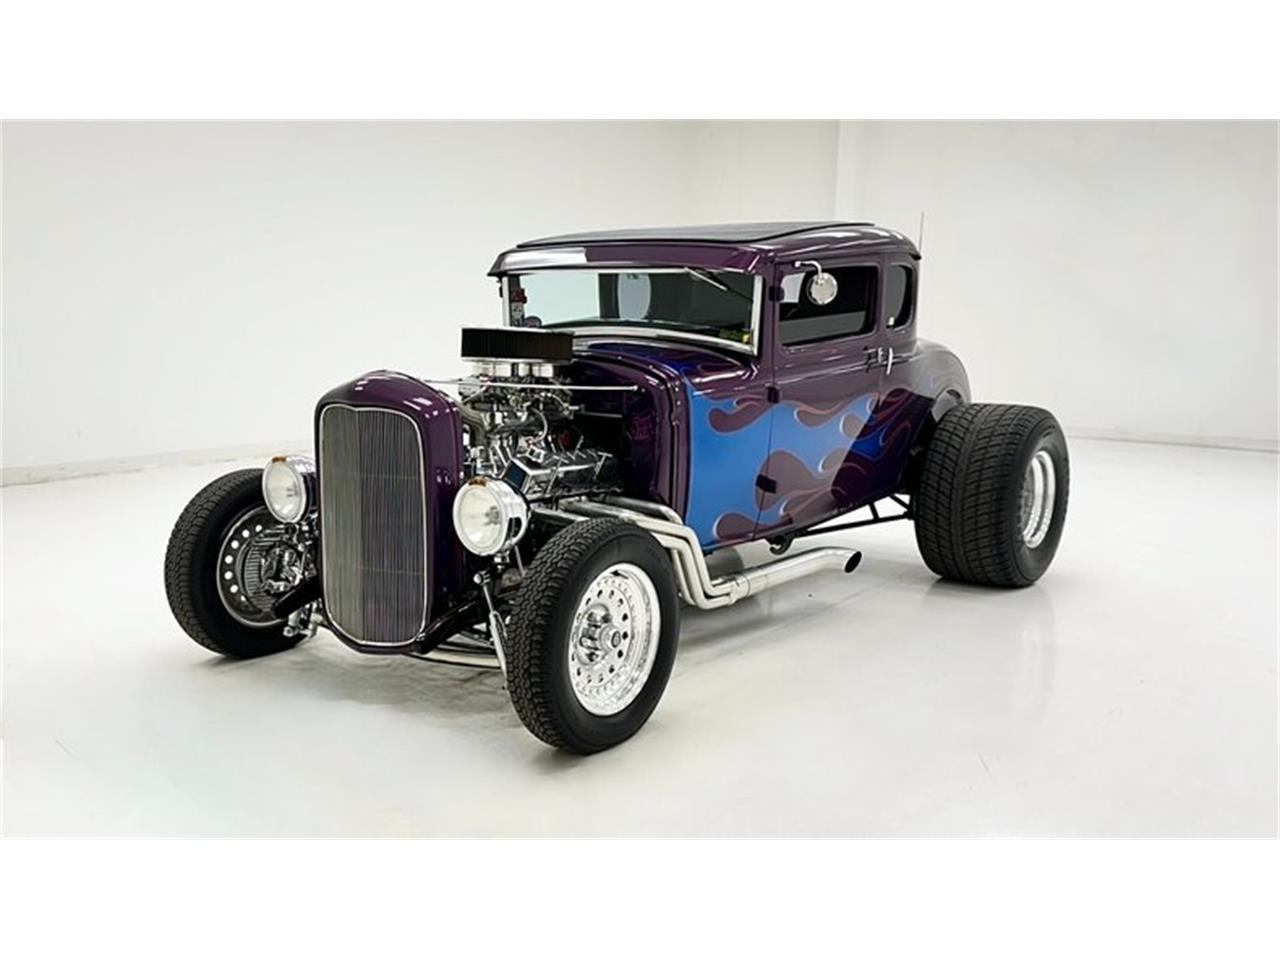 For Sale: 1930 Ford Model A in Morgantown, Pennsylvania for sale in Morgantown, PA